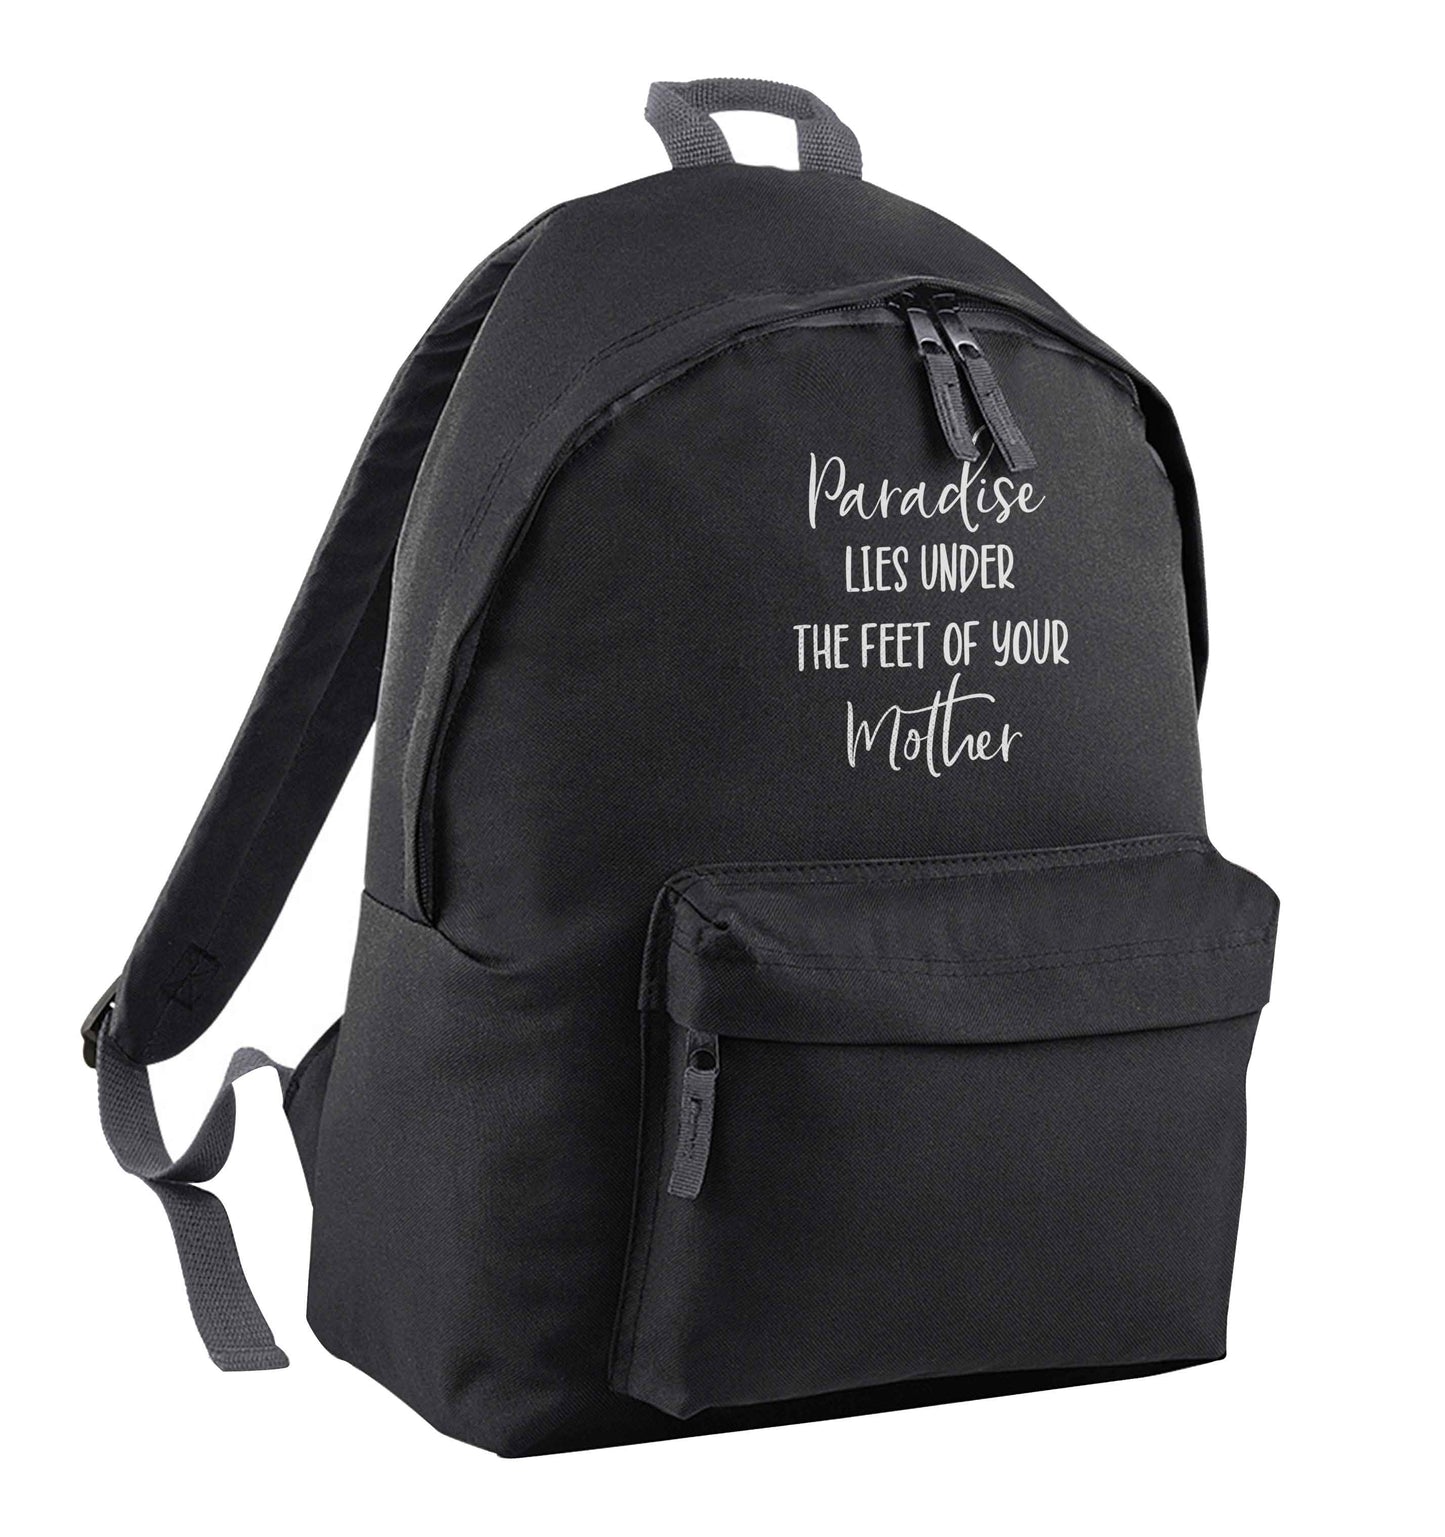 Paradise lies under the feet of your mother black adults backpack